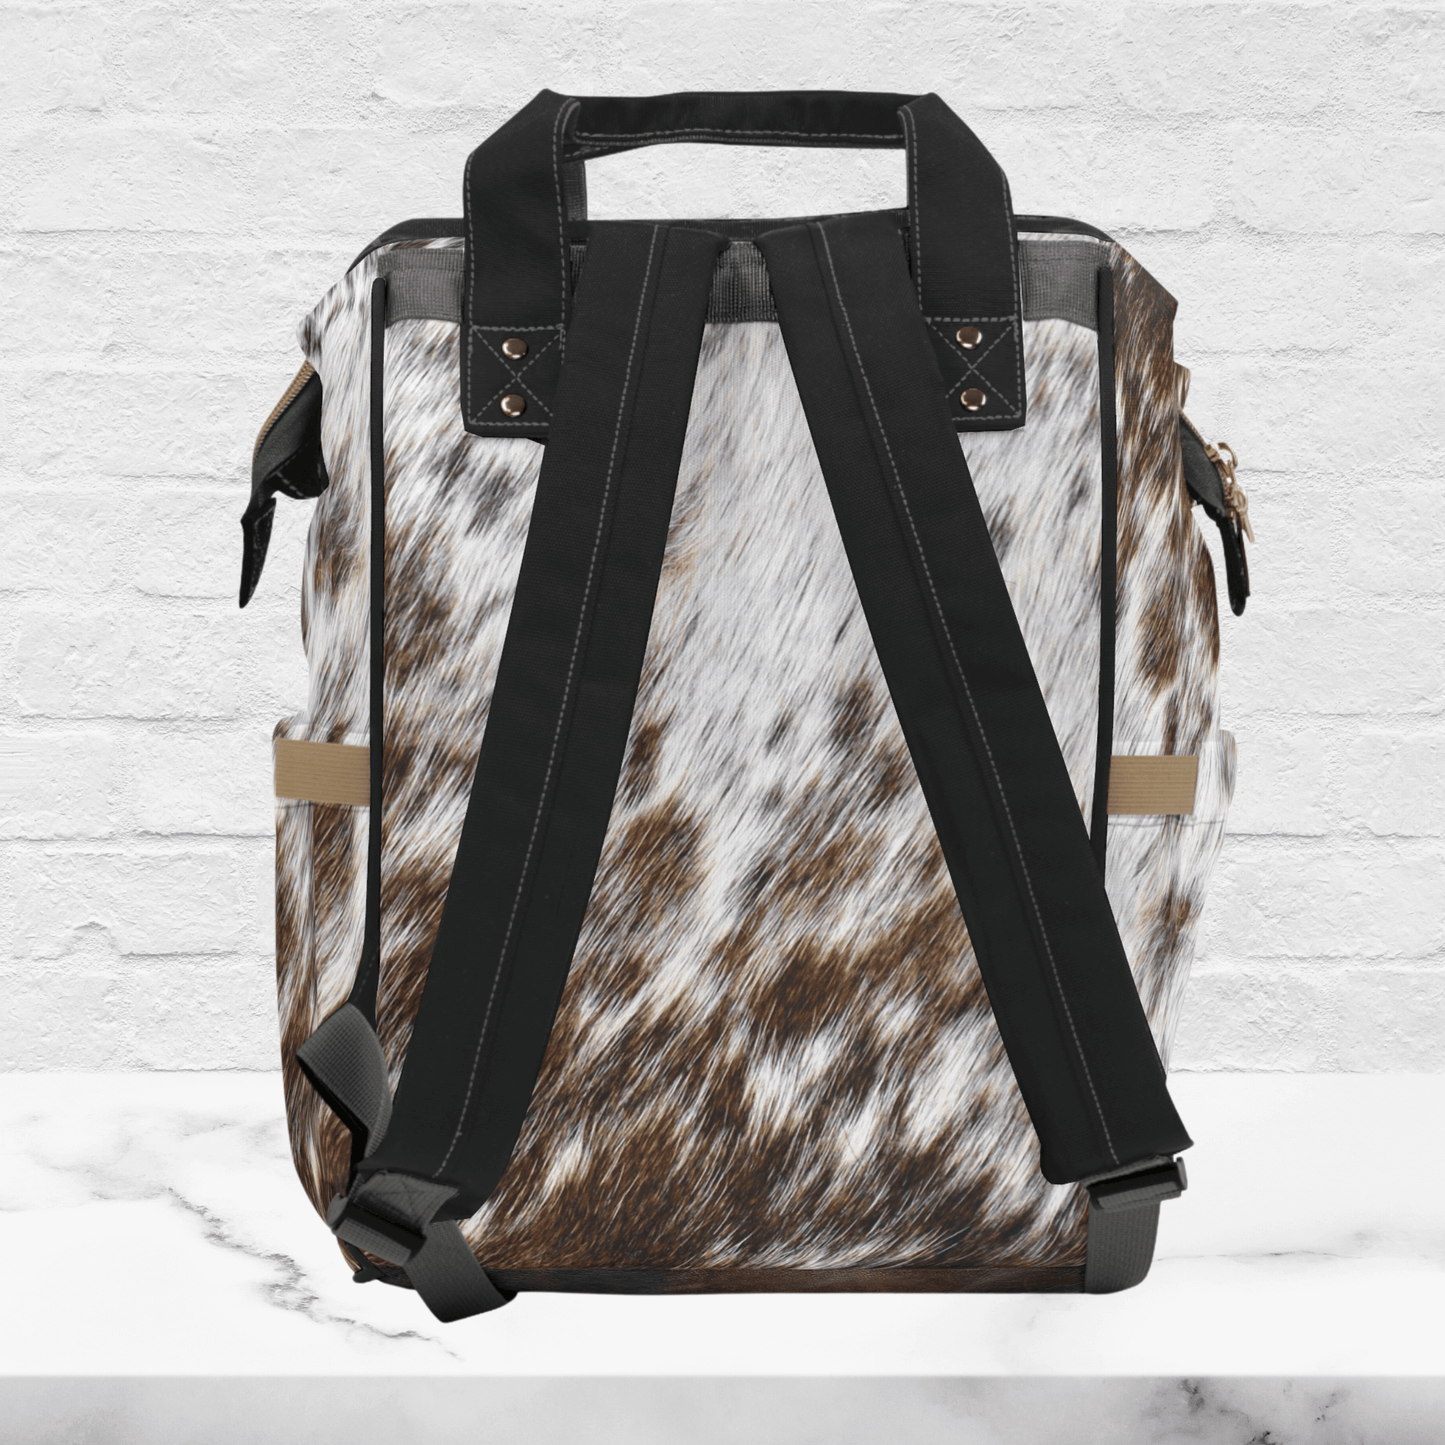 The back of our multipurpose airport backpack for women shows the beautiful cowhide print with black padded adjustable straps and black piping around the edges .